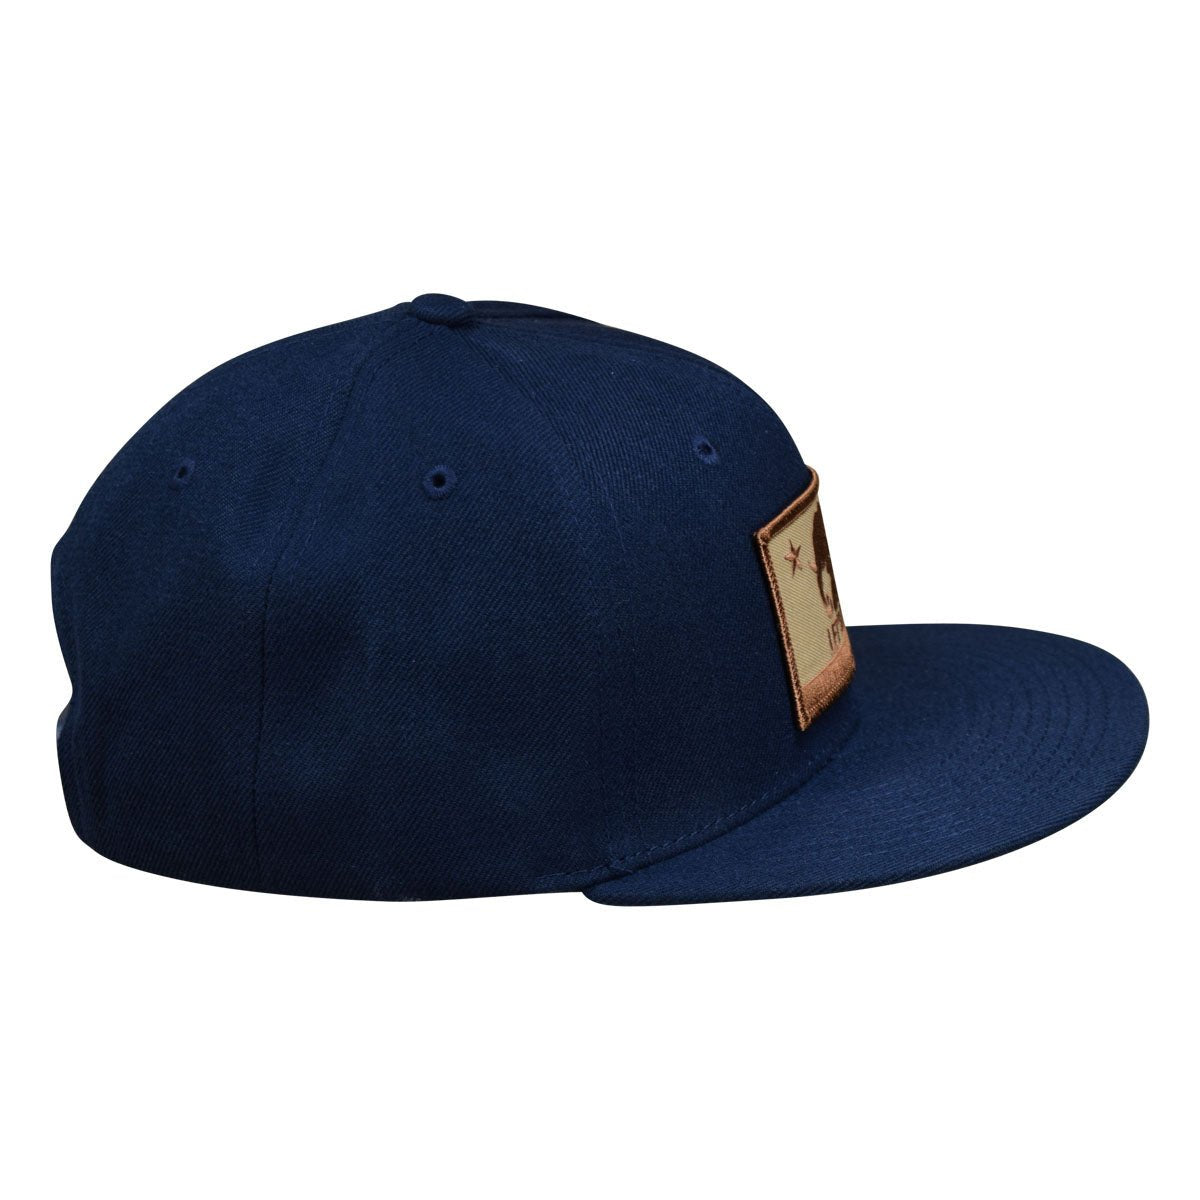 LET'S BE IRIE Snapback Hat - California Irie Flag, Navy Blue - Let's Be Irie™